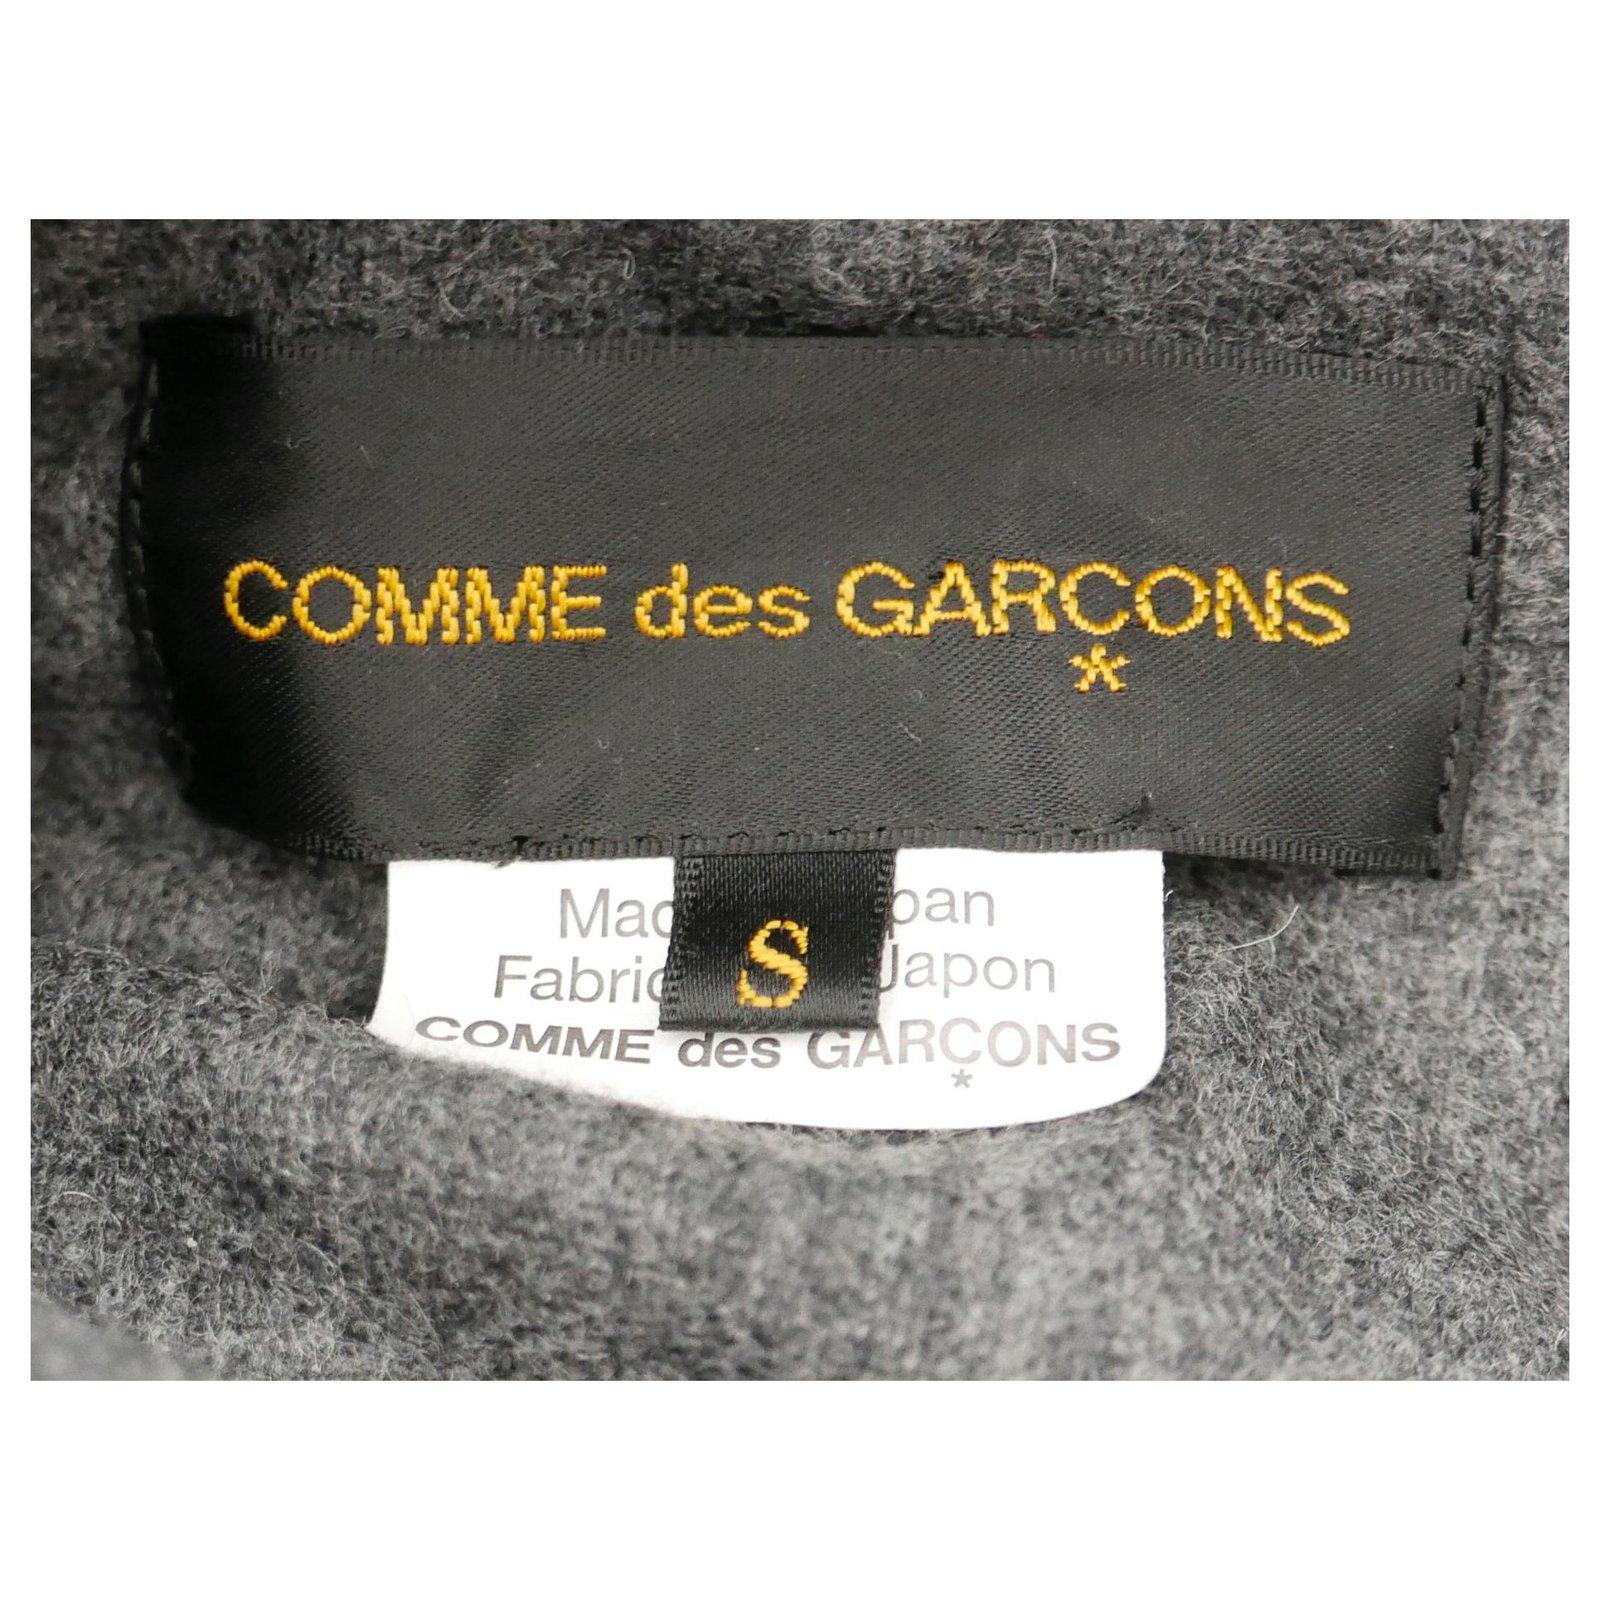 Comme Des Garcons Fall 2014 Rope Front Jumbo Knit Jacket Unisex For Sale 4